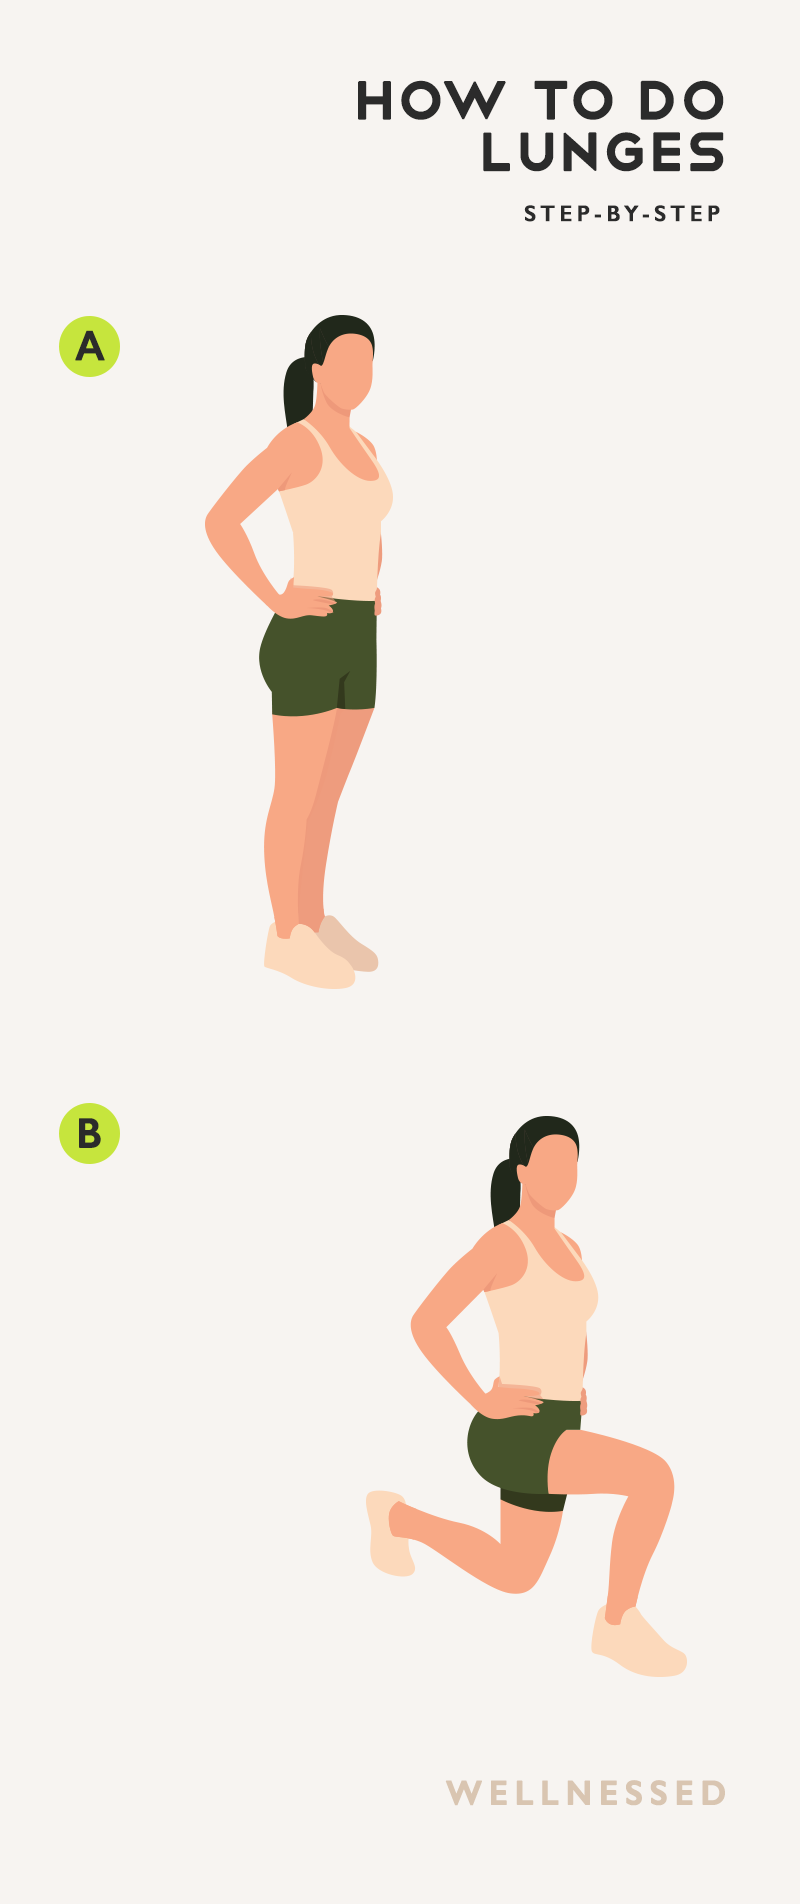 Step-by-step illustration of how to do lunges